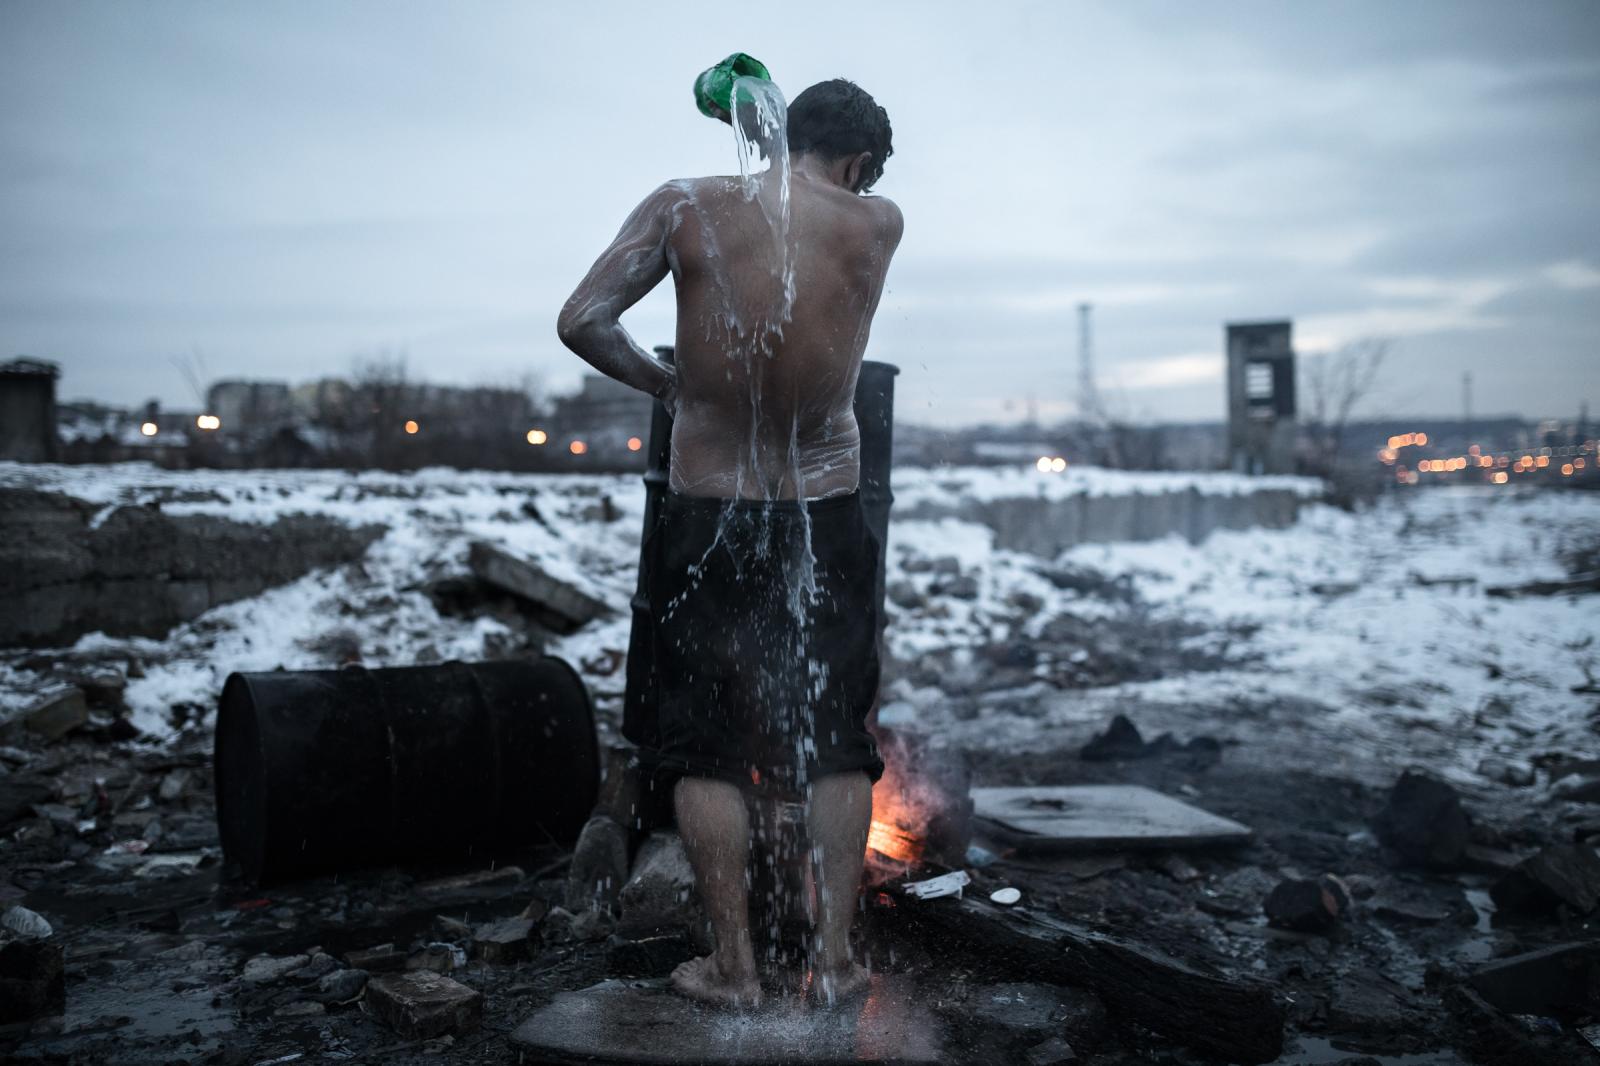 An Afghan migrant washes his bo...ward toward the central Europe.